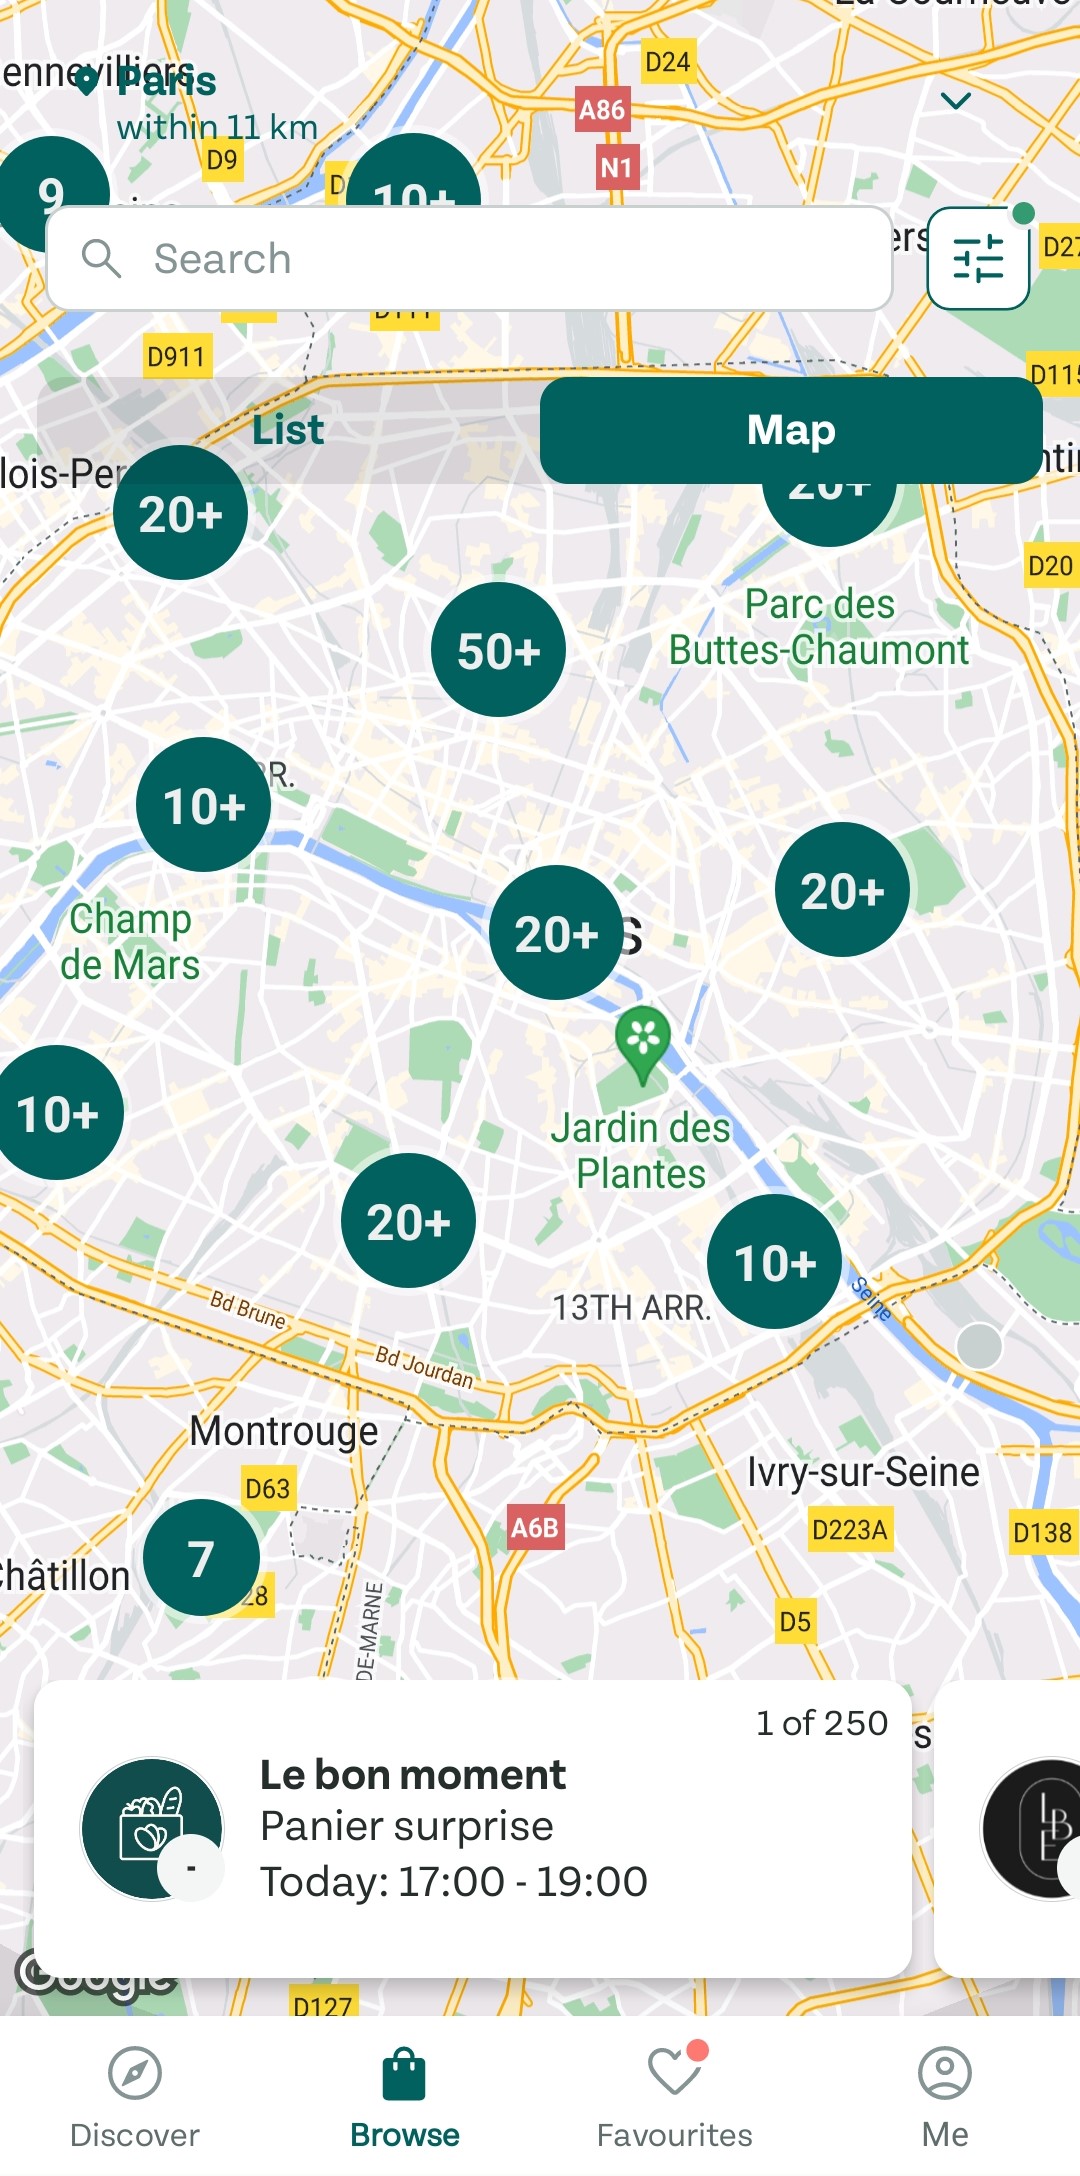 A map showing the location of a restaurant in paris.